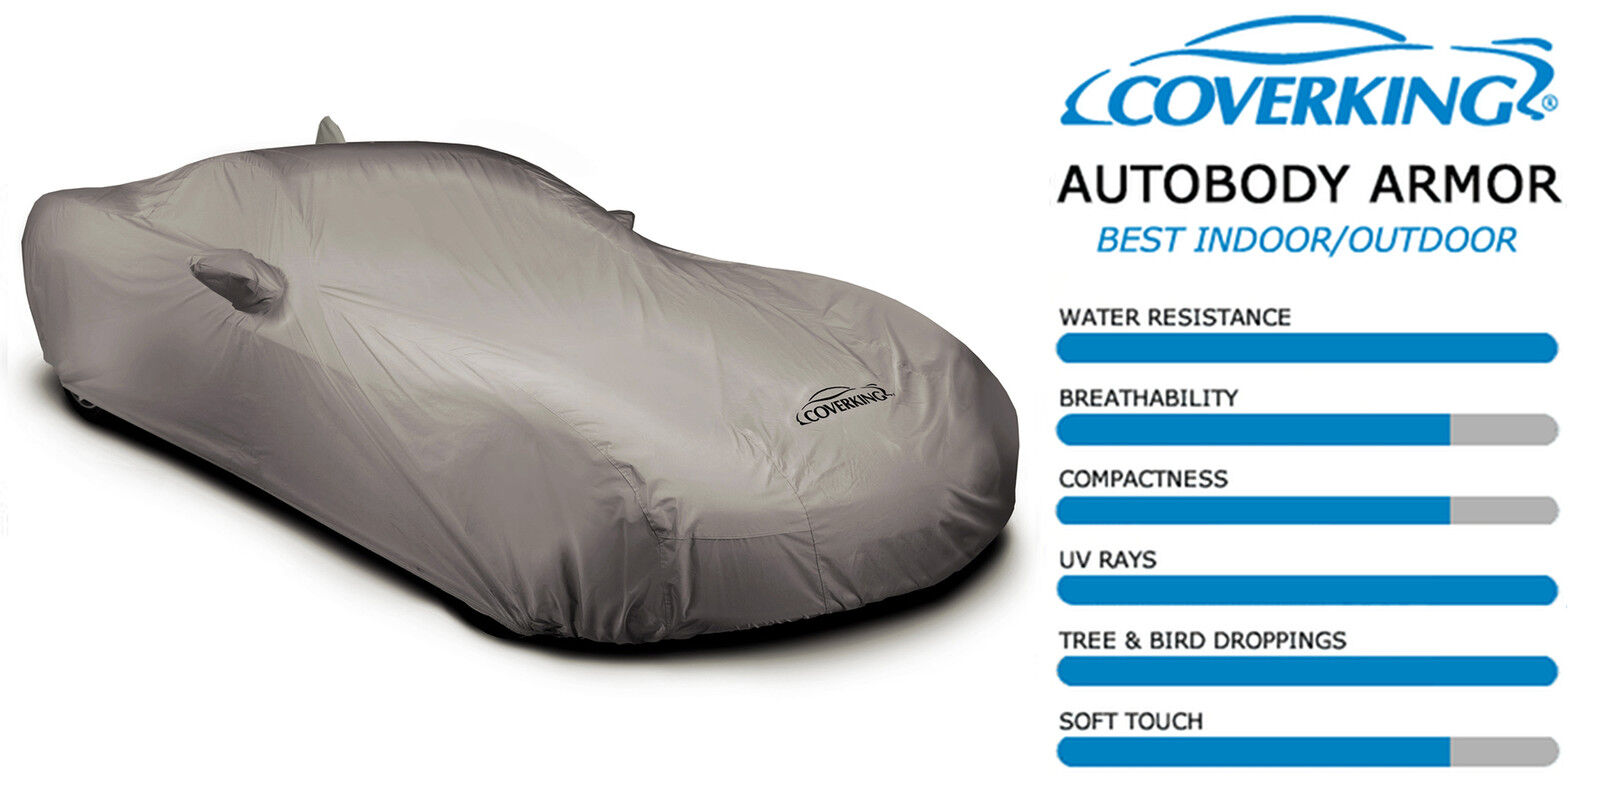 COVERKING AUTOBODY ARMOR All-Weather CAR COVER made for 1988-2004 Lotus Esprit